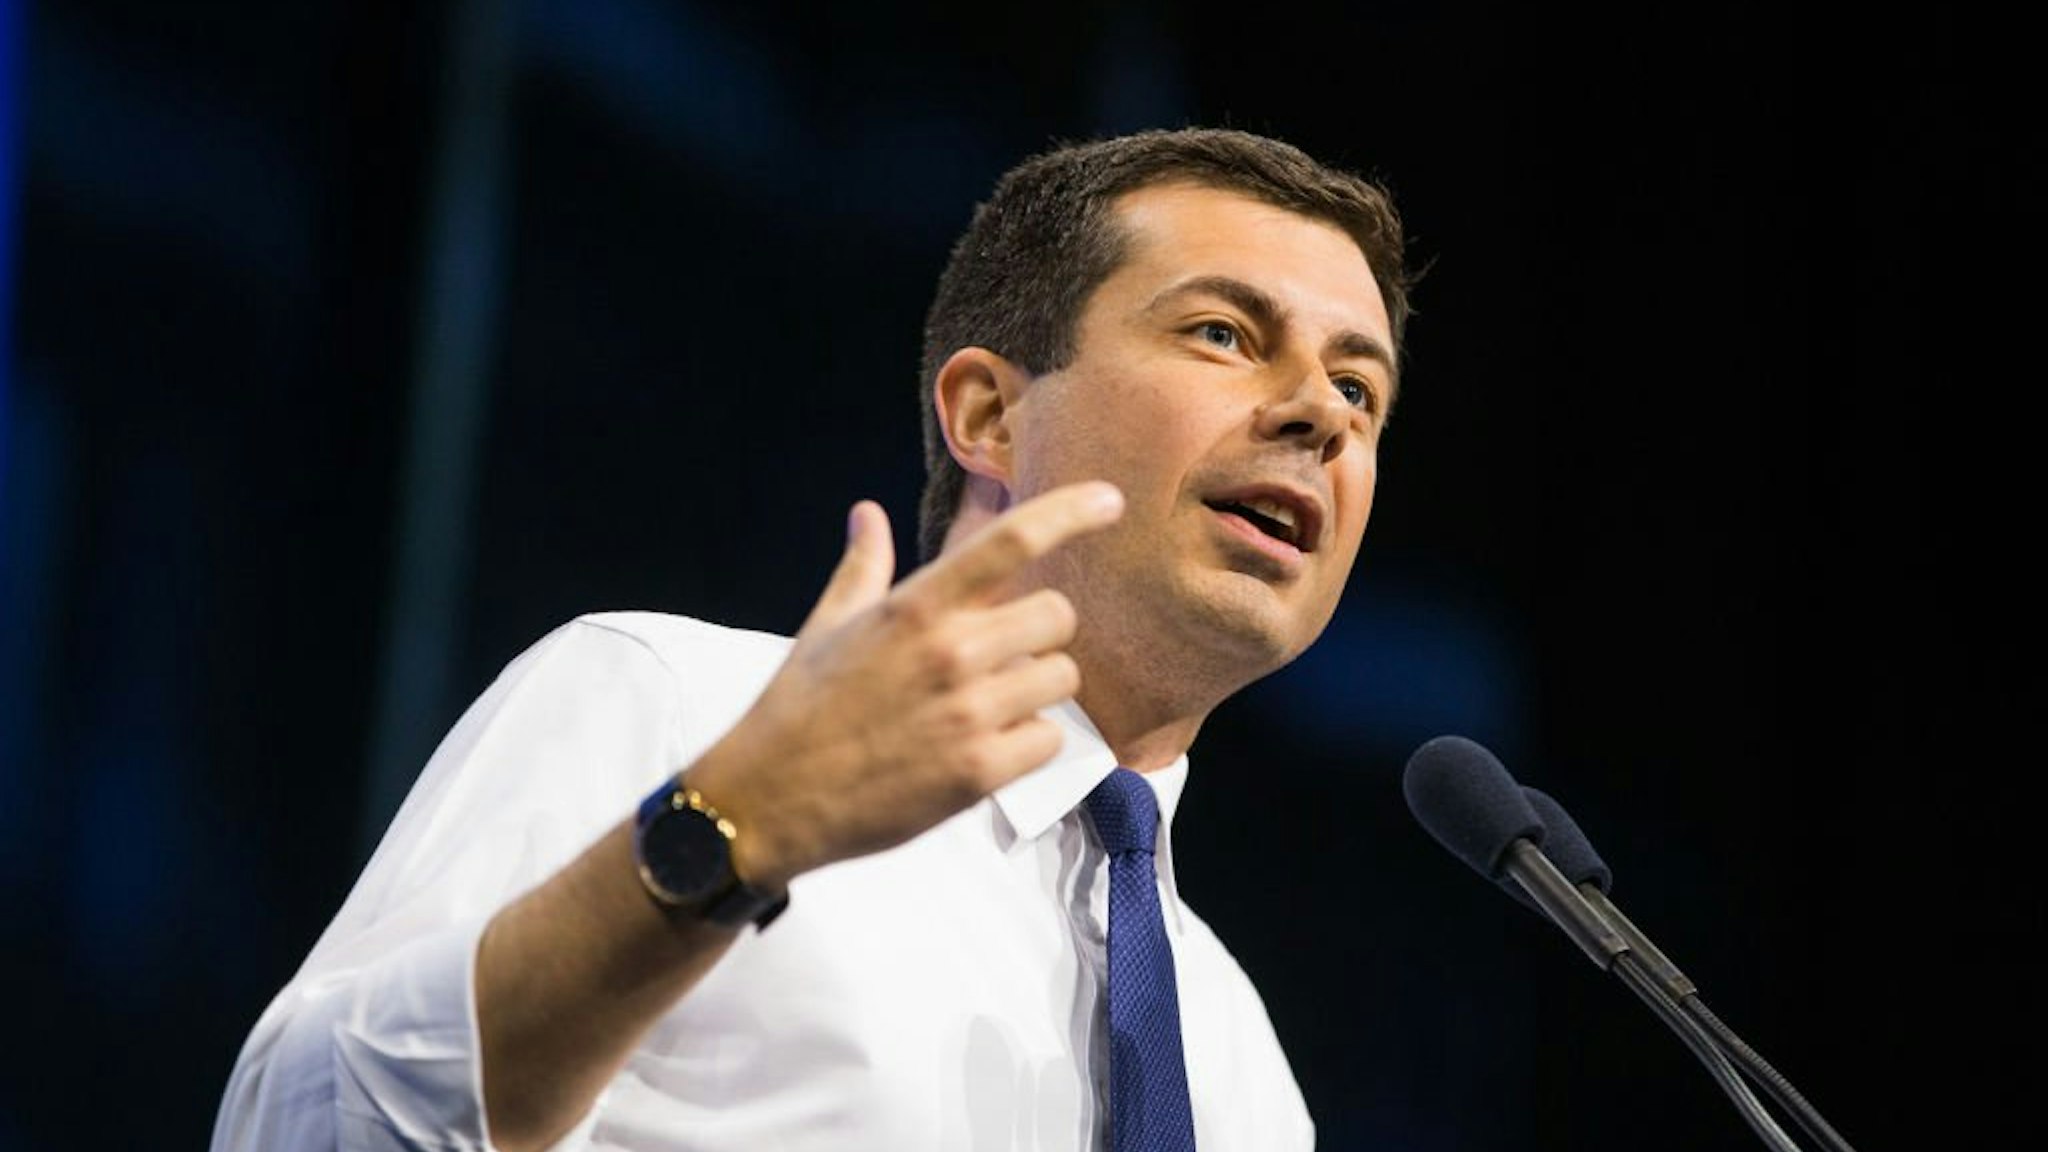 Democratic presidential candidate, South Bend, Indiana Mayor Pete Buttigieg speaks during the New Hampshire Democratic Party Convention at the SNHU Arena on September 7, 2019 in Manchester, New Hampshire.